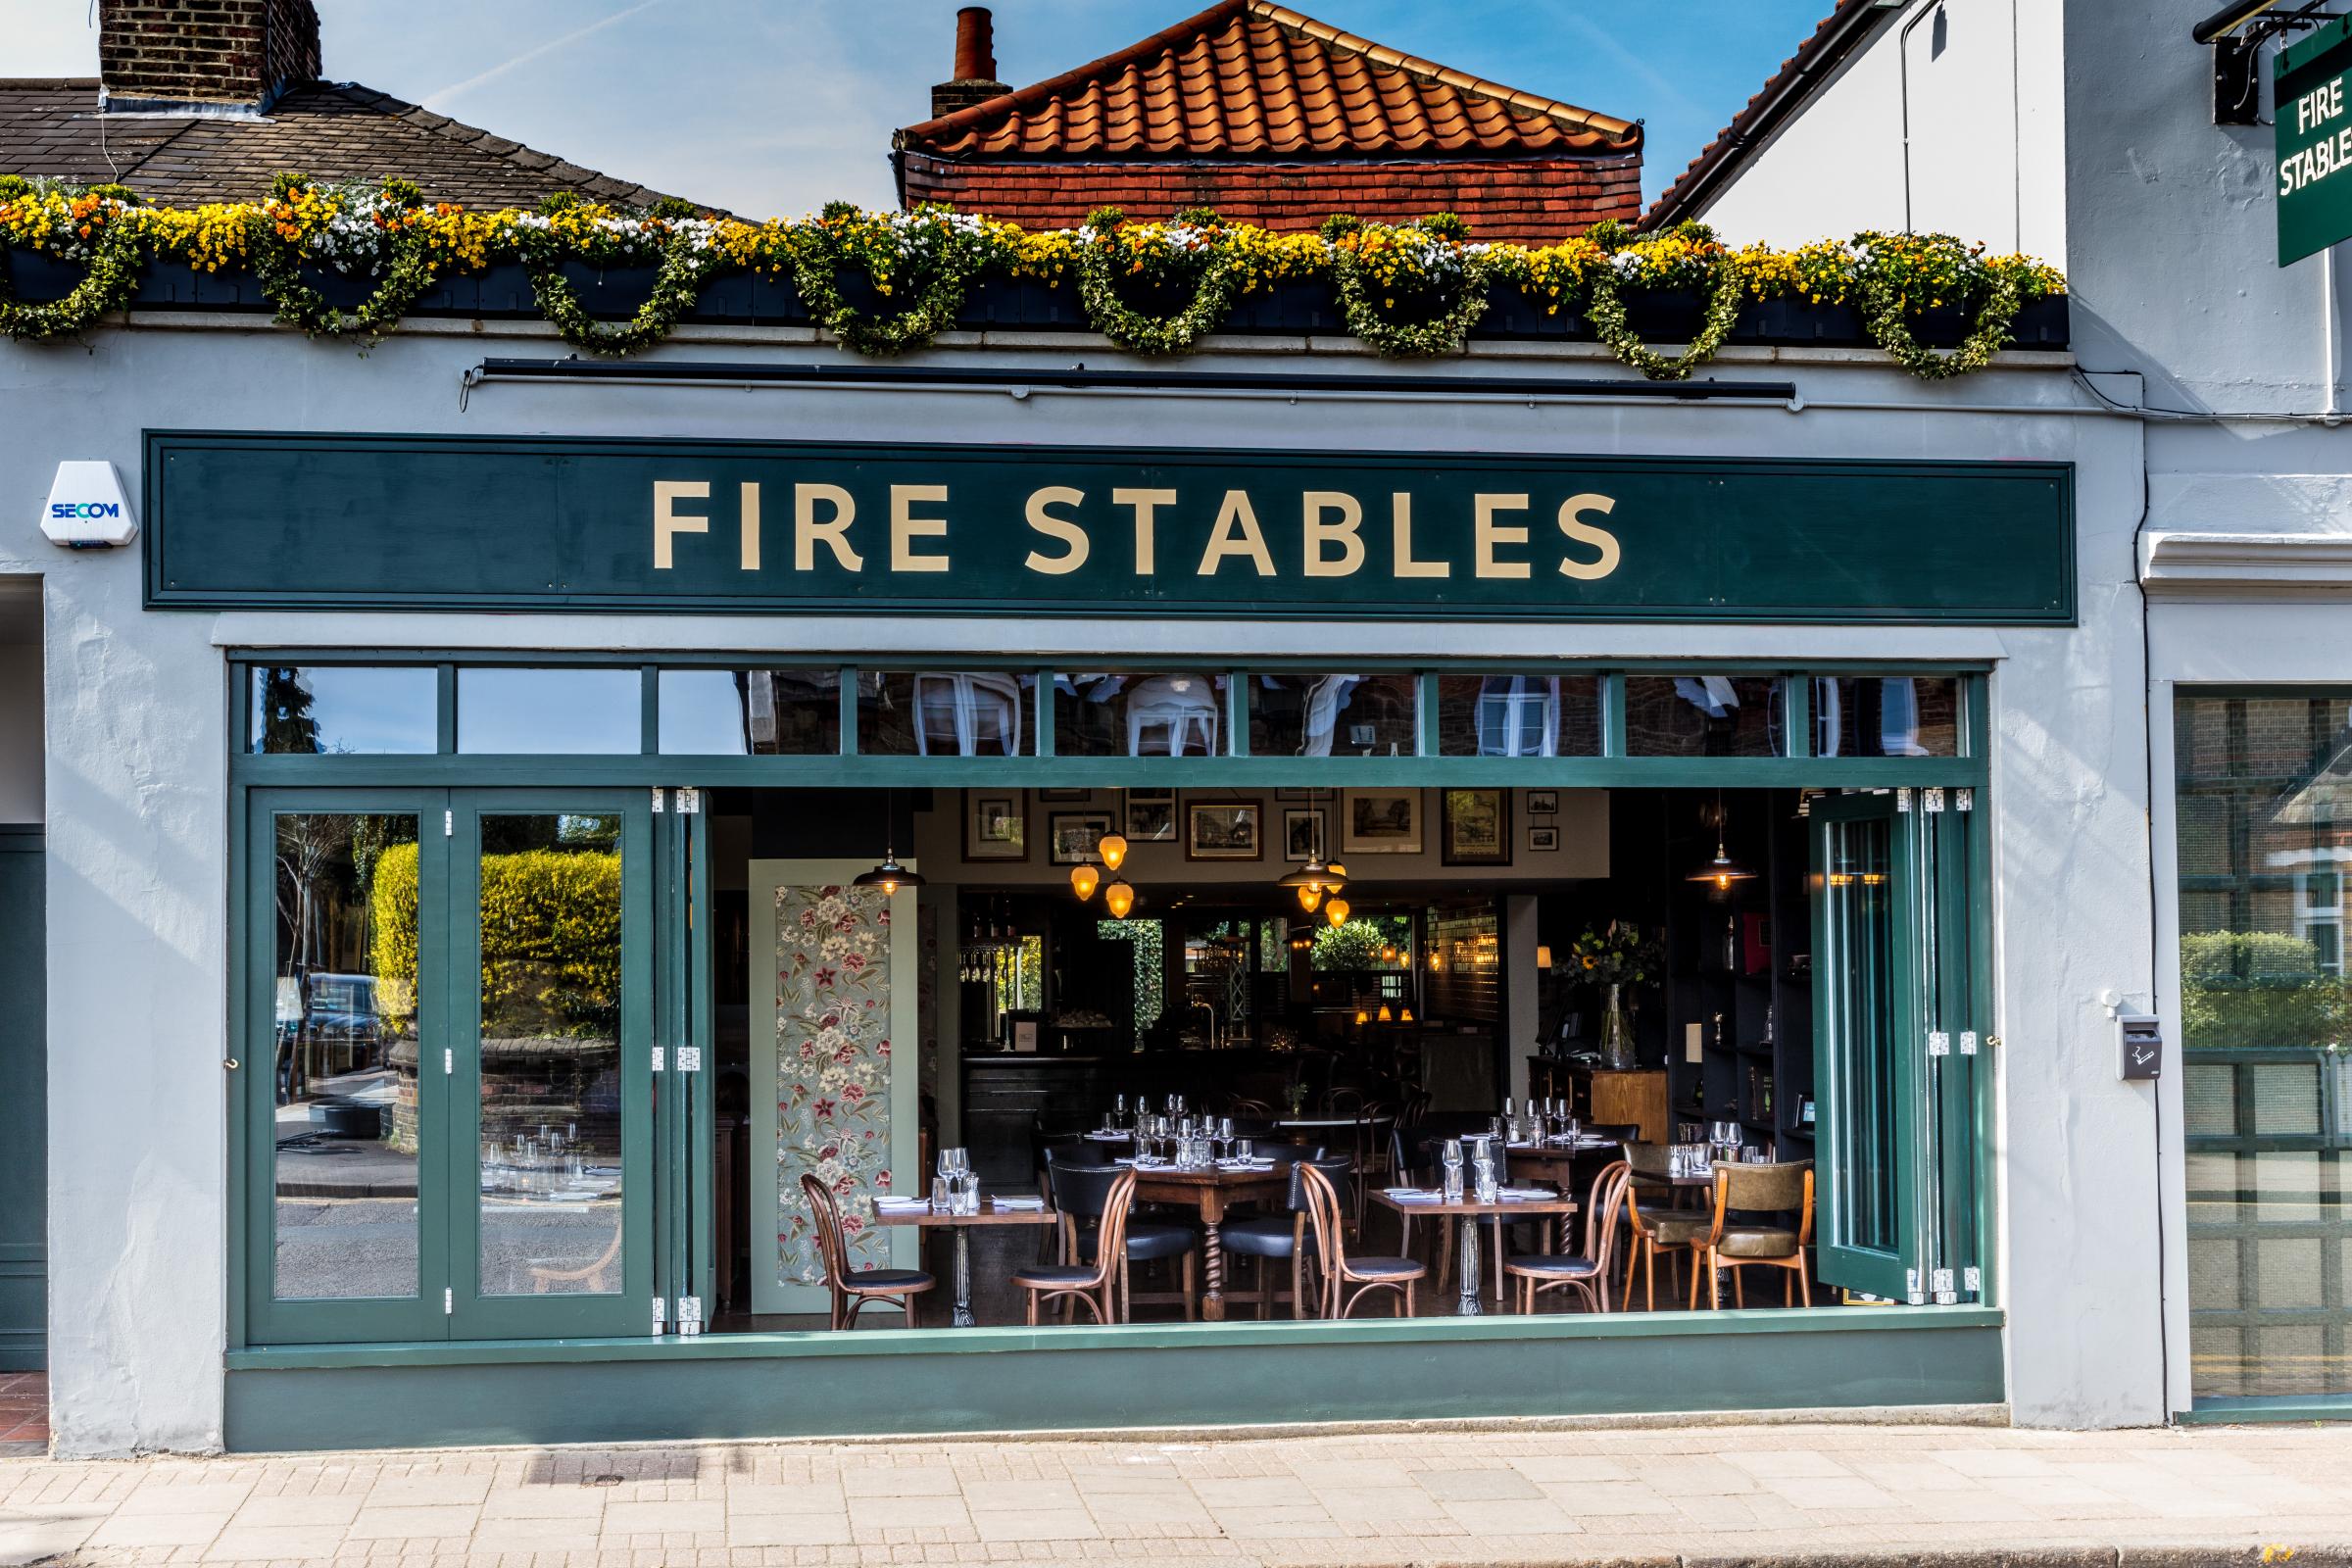 Wimbledon's Fire Stables has re-opened as a fish restaurant and it looks stunning